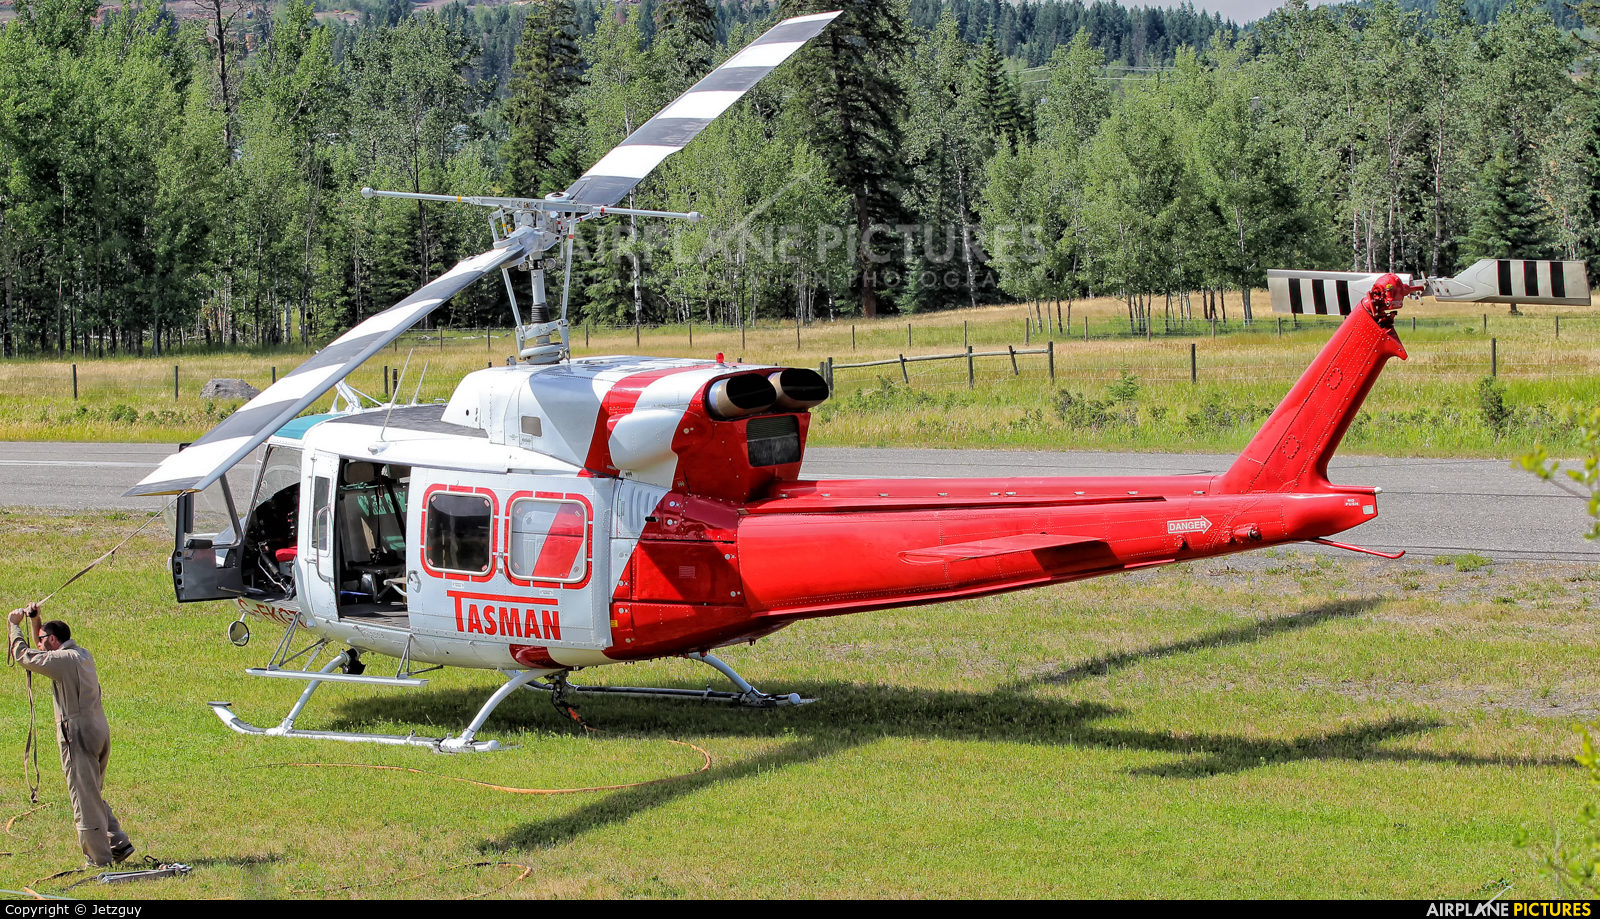 Tasman Helicopters C-FKGT aircraft at 100 Mile House, BC